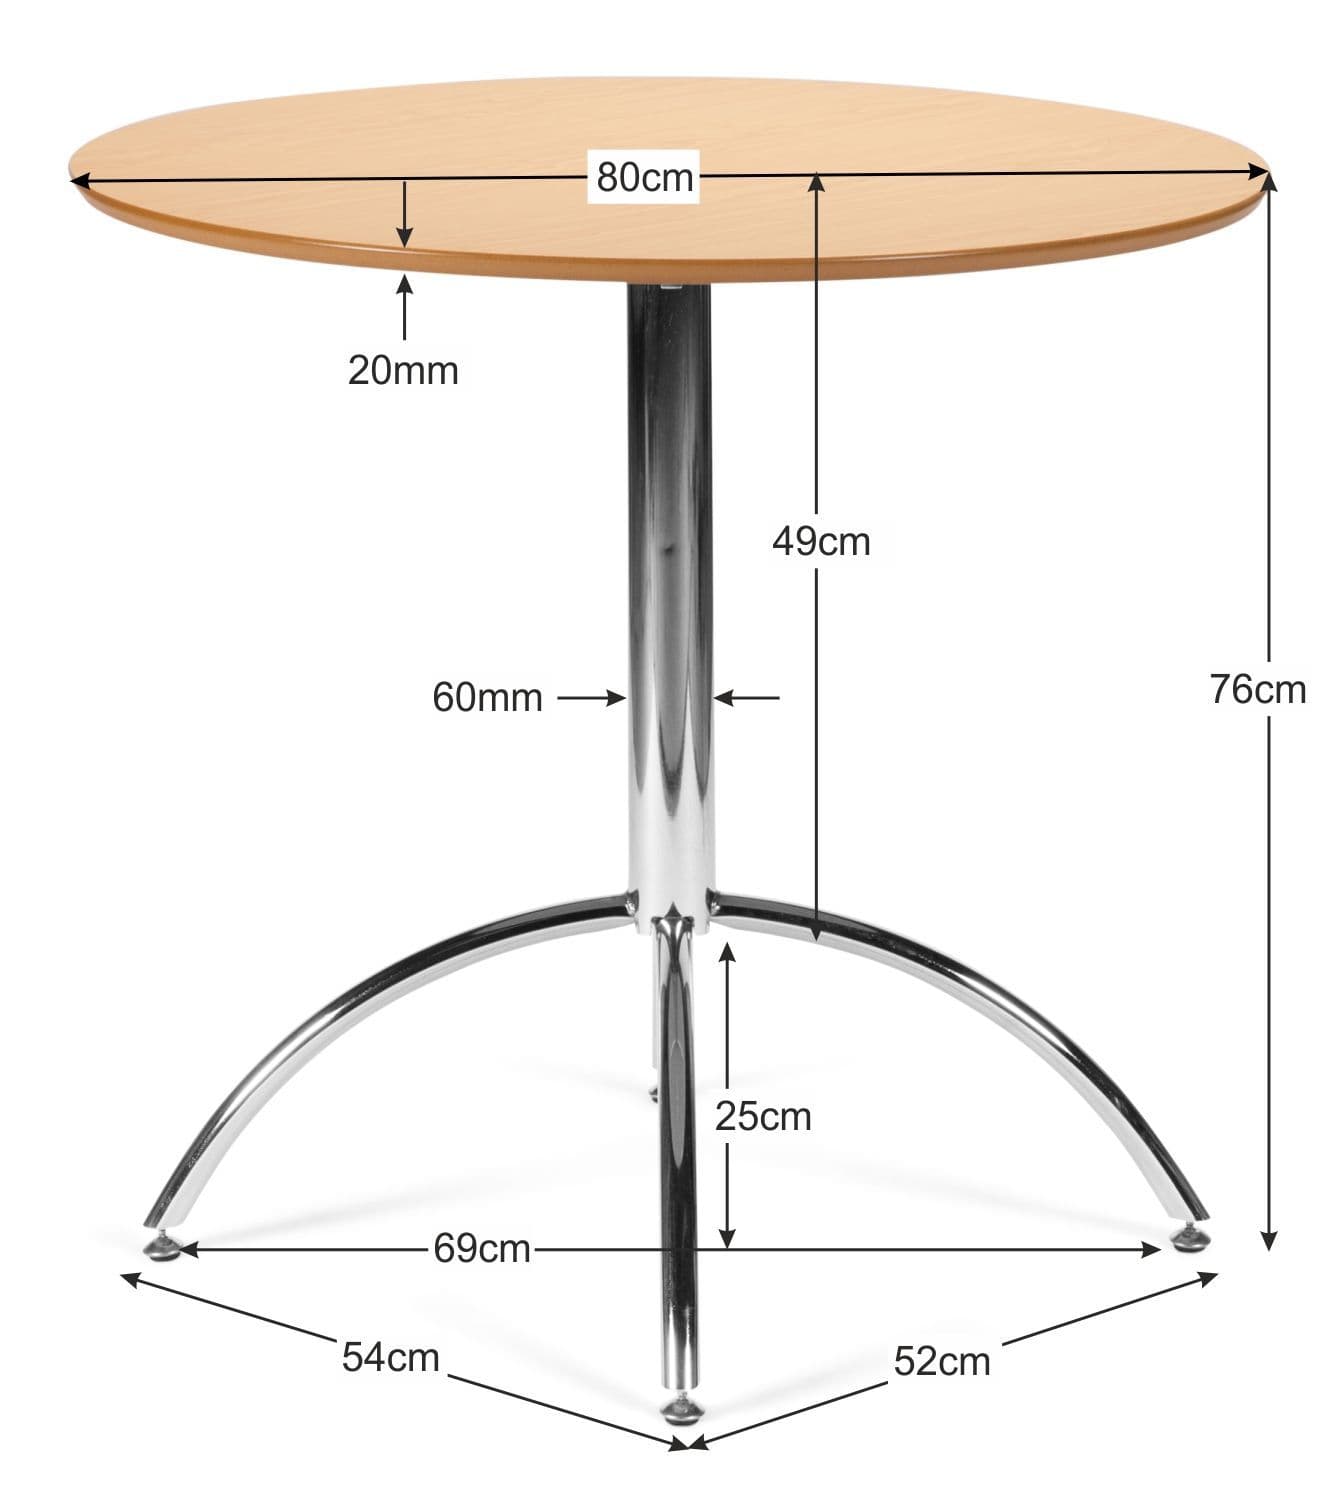 Kimberley Natural & Chrome Dining Table Dimensions